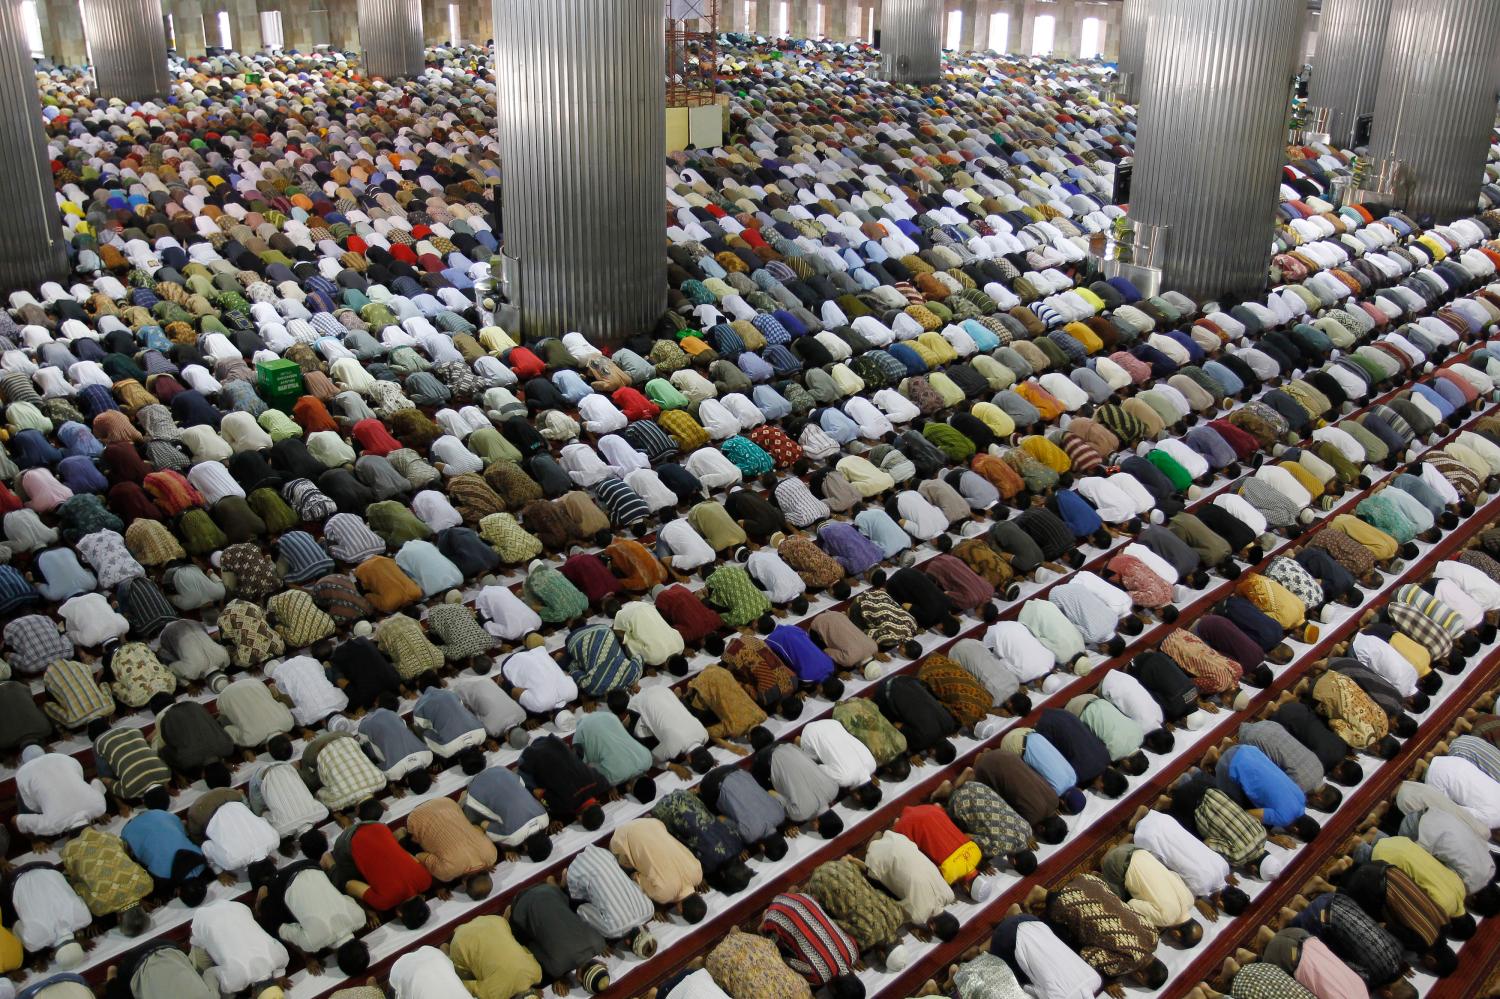 Indonesian Muslims attend Friday prayers at the Istiqlal mosque in Jakarta July 23, 2010. Indonesia's Muslims learned last week they have been praying in the wrong direction, after the country's highest Islamic authority said its directive on the direction of Mecca actually had people facing Africa. Muslims are supposed to face the holy city of Mecca in Saudi Arabia during prayer and the Indonesian Ulema Council (MUI) issued an edict in March stipulating westward was the correct direction from the world's most populous Muslim country. It has now said the true direction is north-west. REUTERS/Supri (INDONESIA - Tags: RELIGION ODDLY IMAGES OF THE DAY) - GM1E67N18IZ01